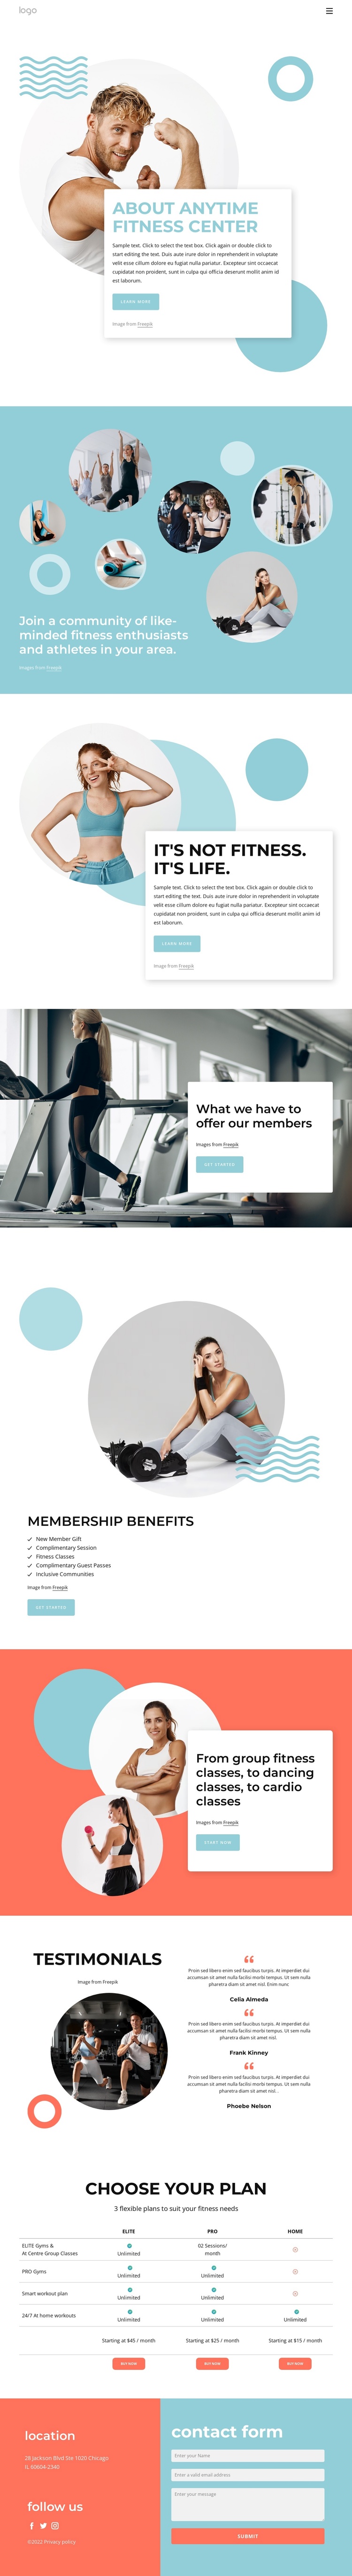 About Anytime fitness center Joomla Template